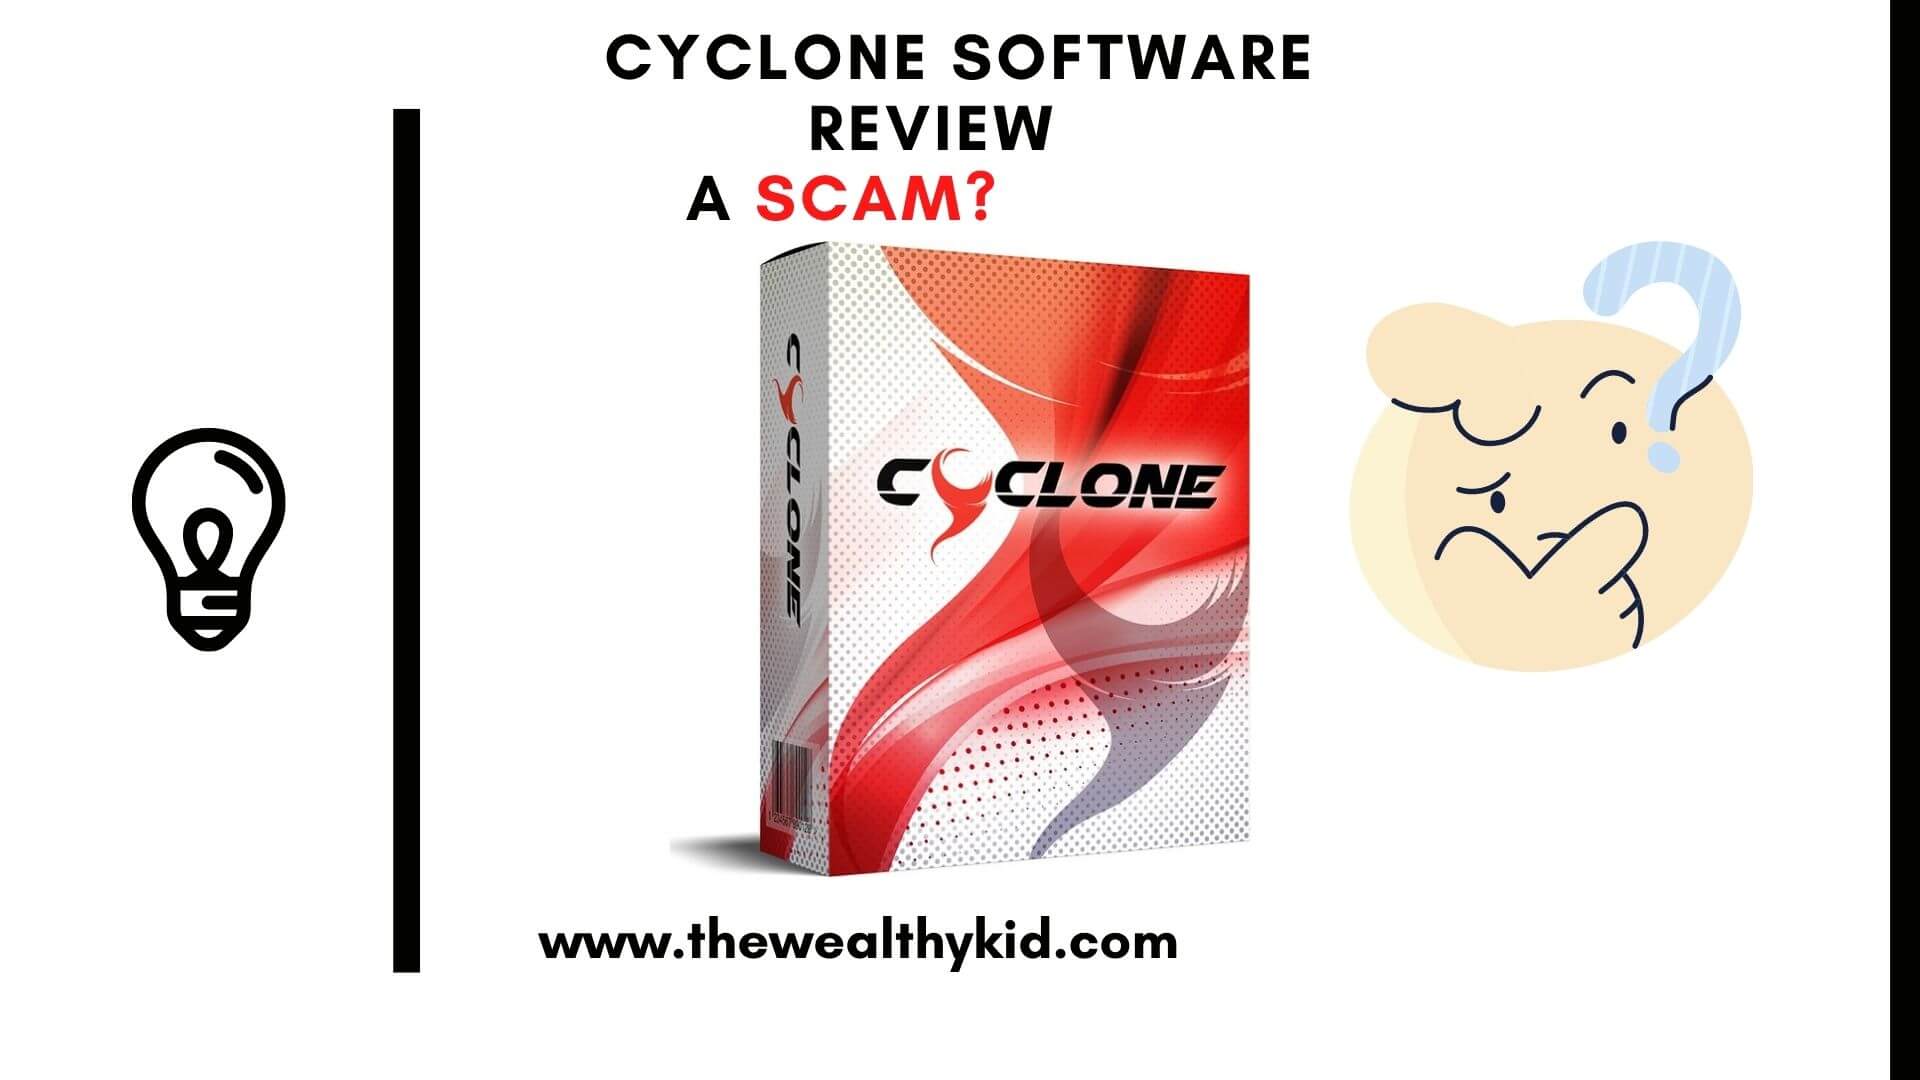 Cyclone Software Review